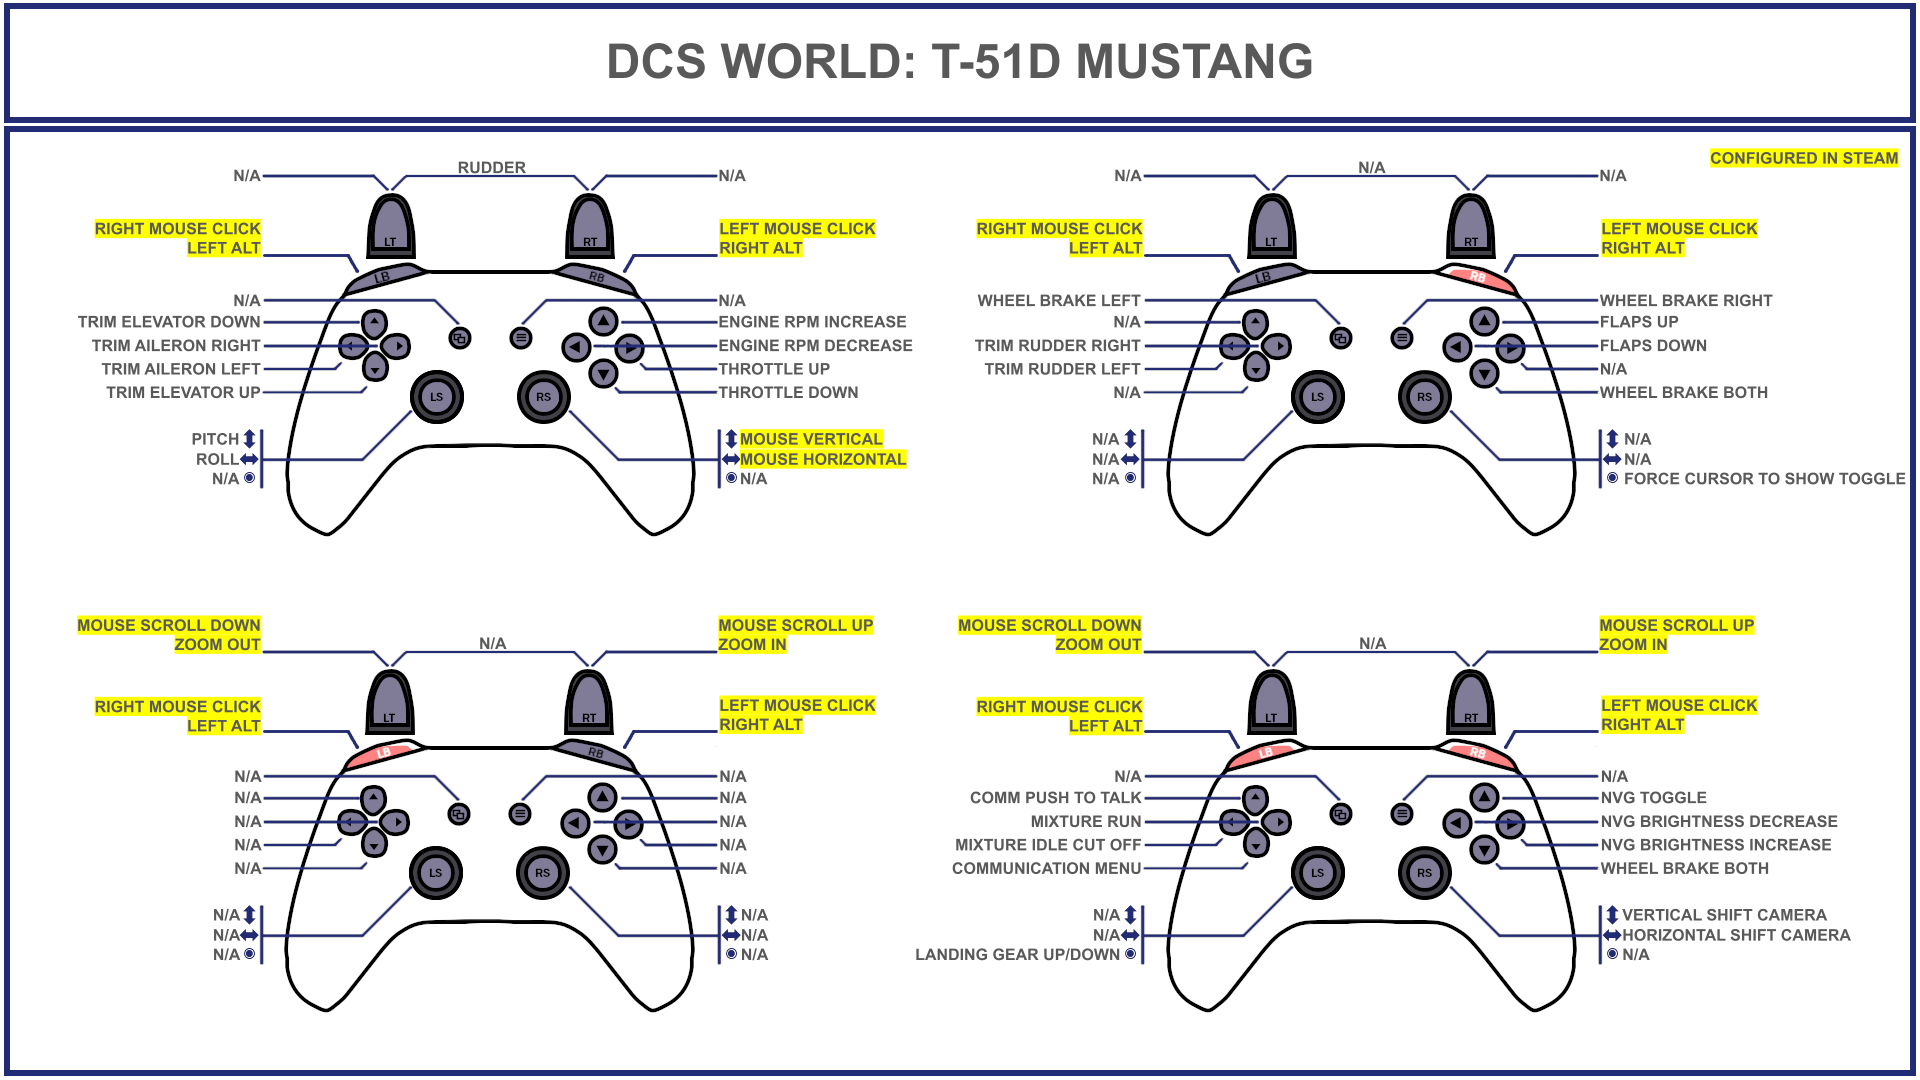 Tuuvas' Official TF-51D Gamepad Controller Layout